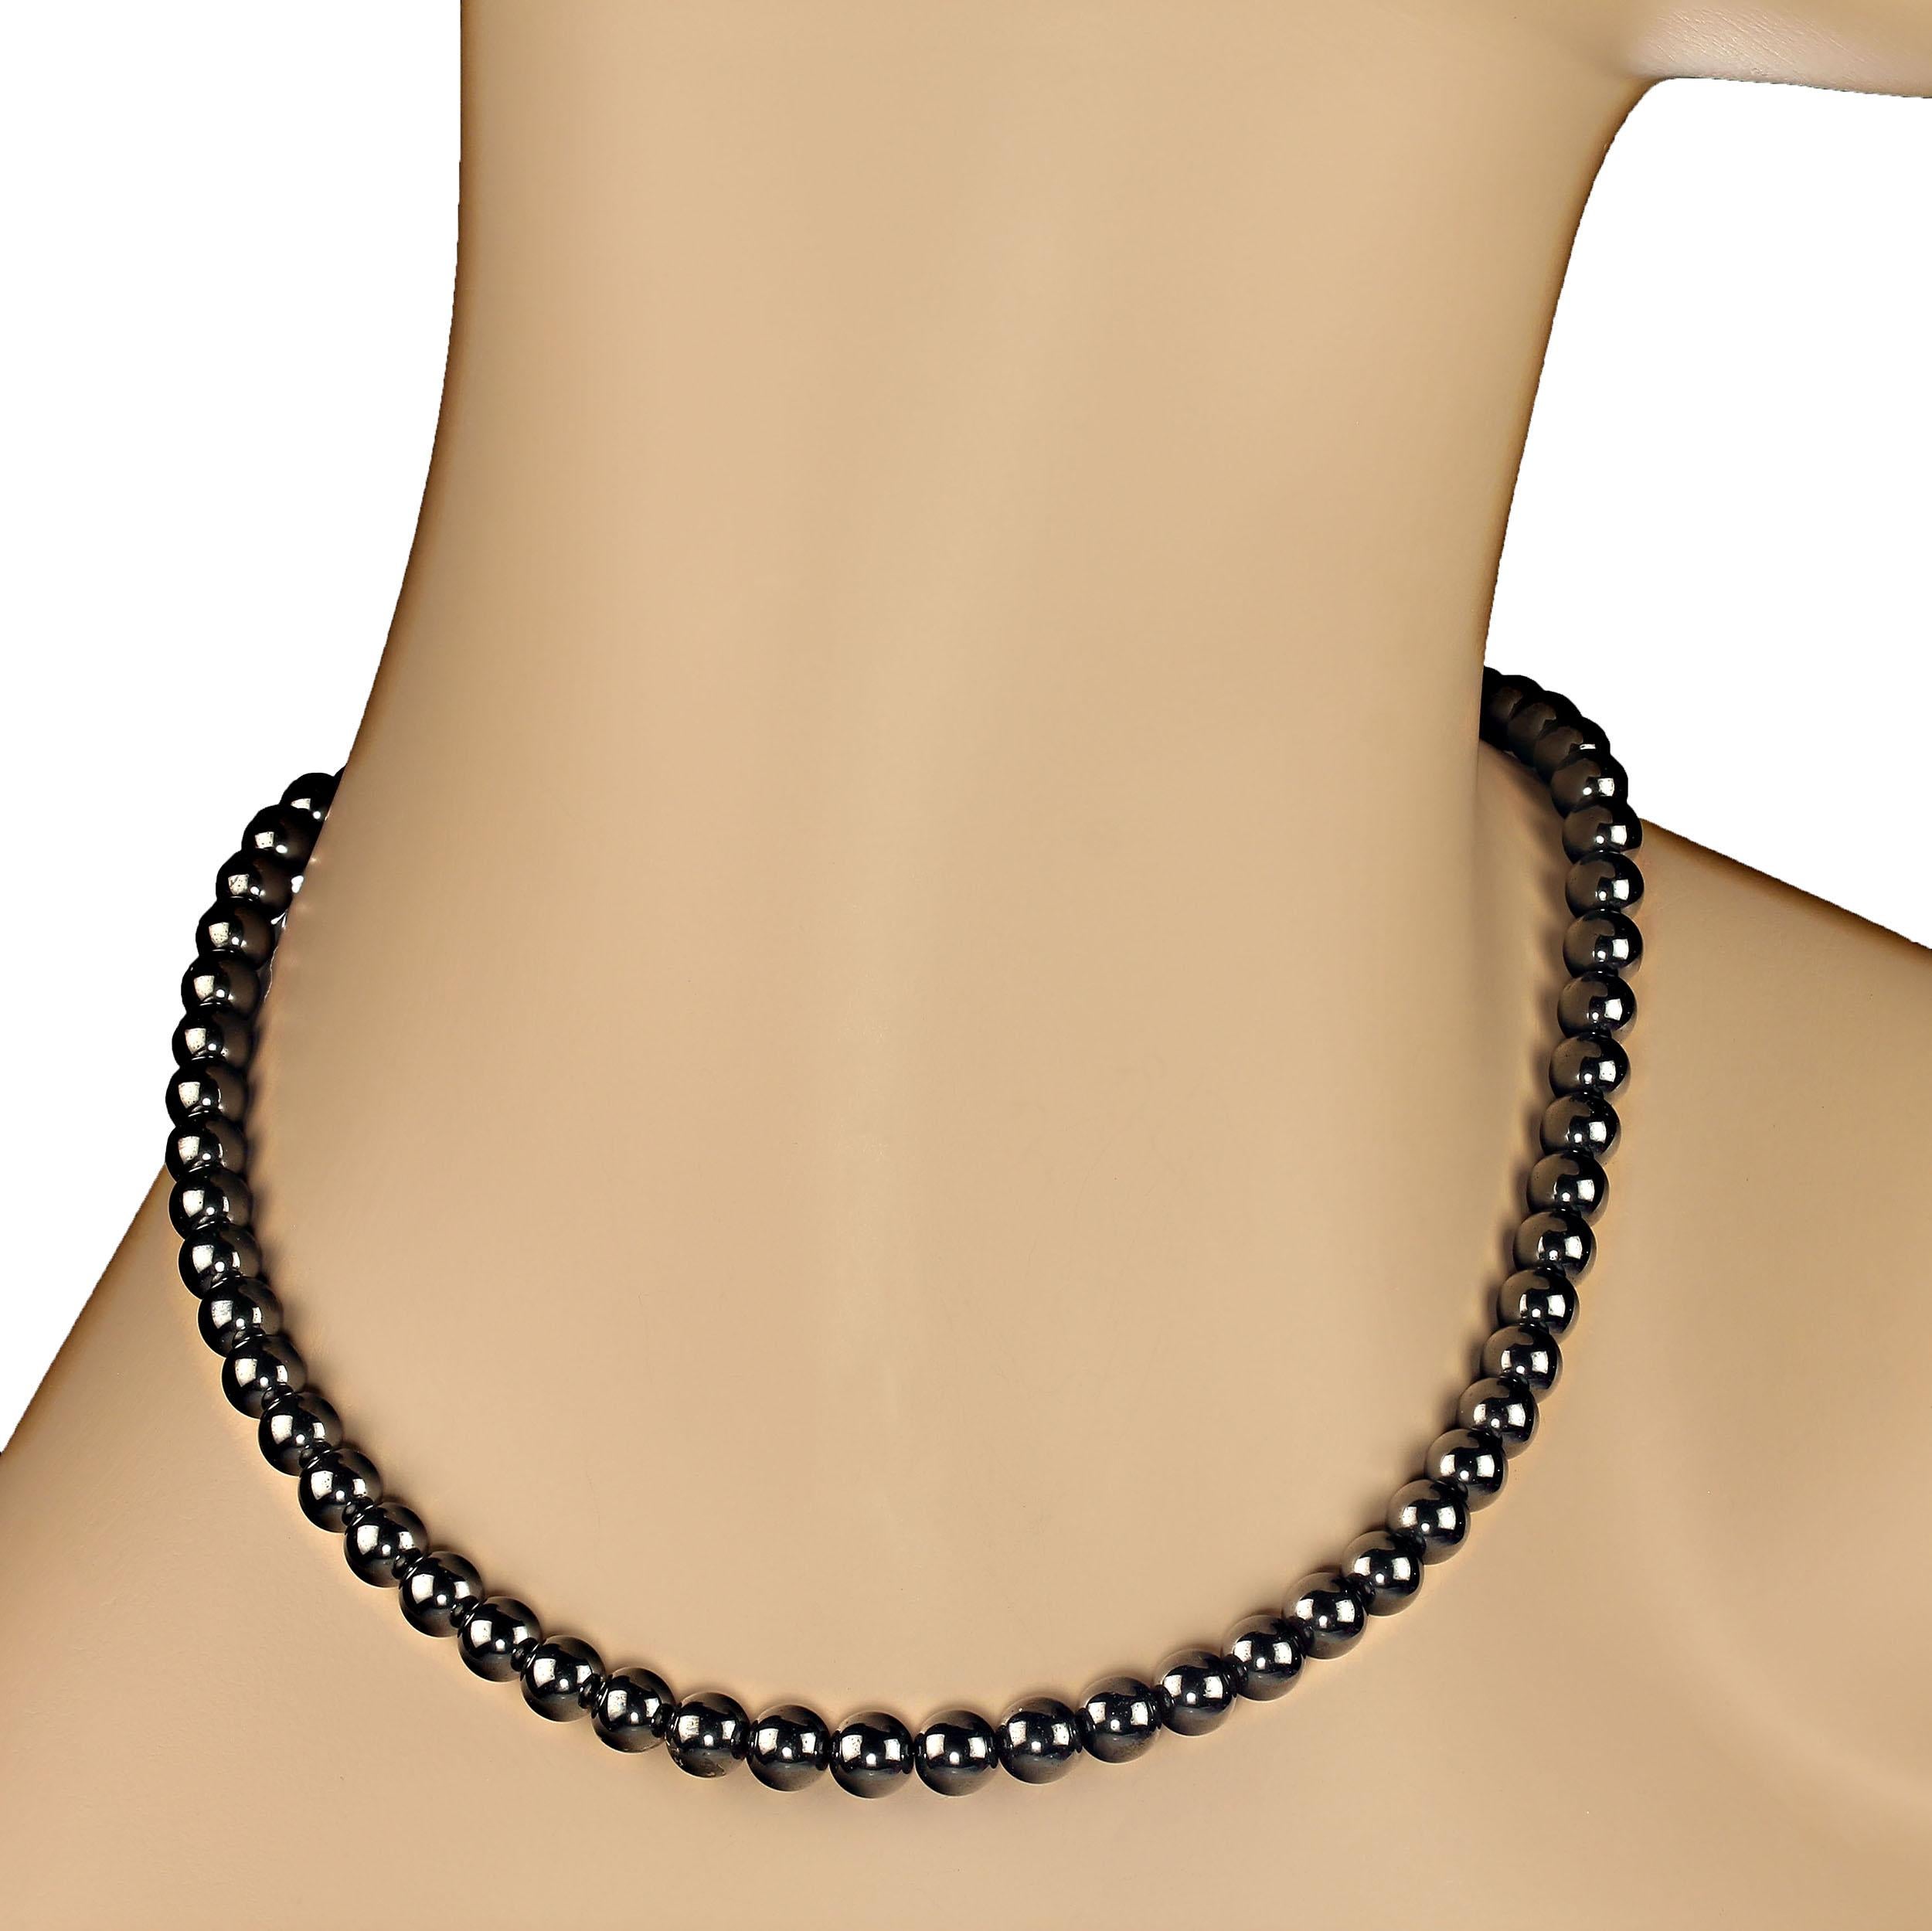 AJD 18 Inch Hematite Necklace with Silver Clasp    Perfect Gift!